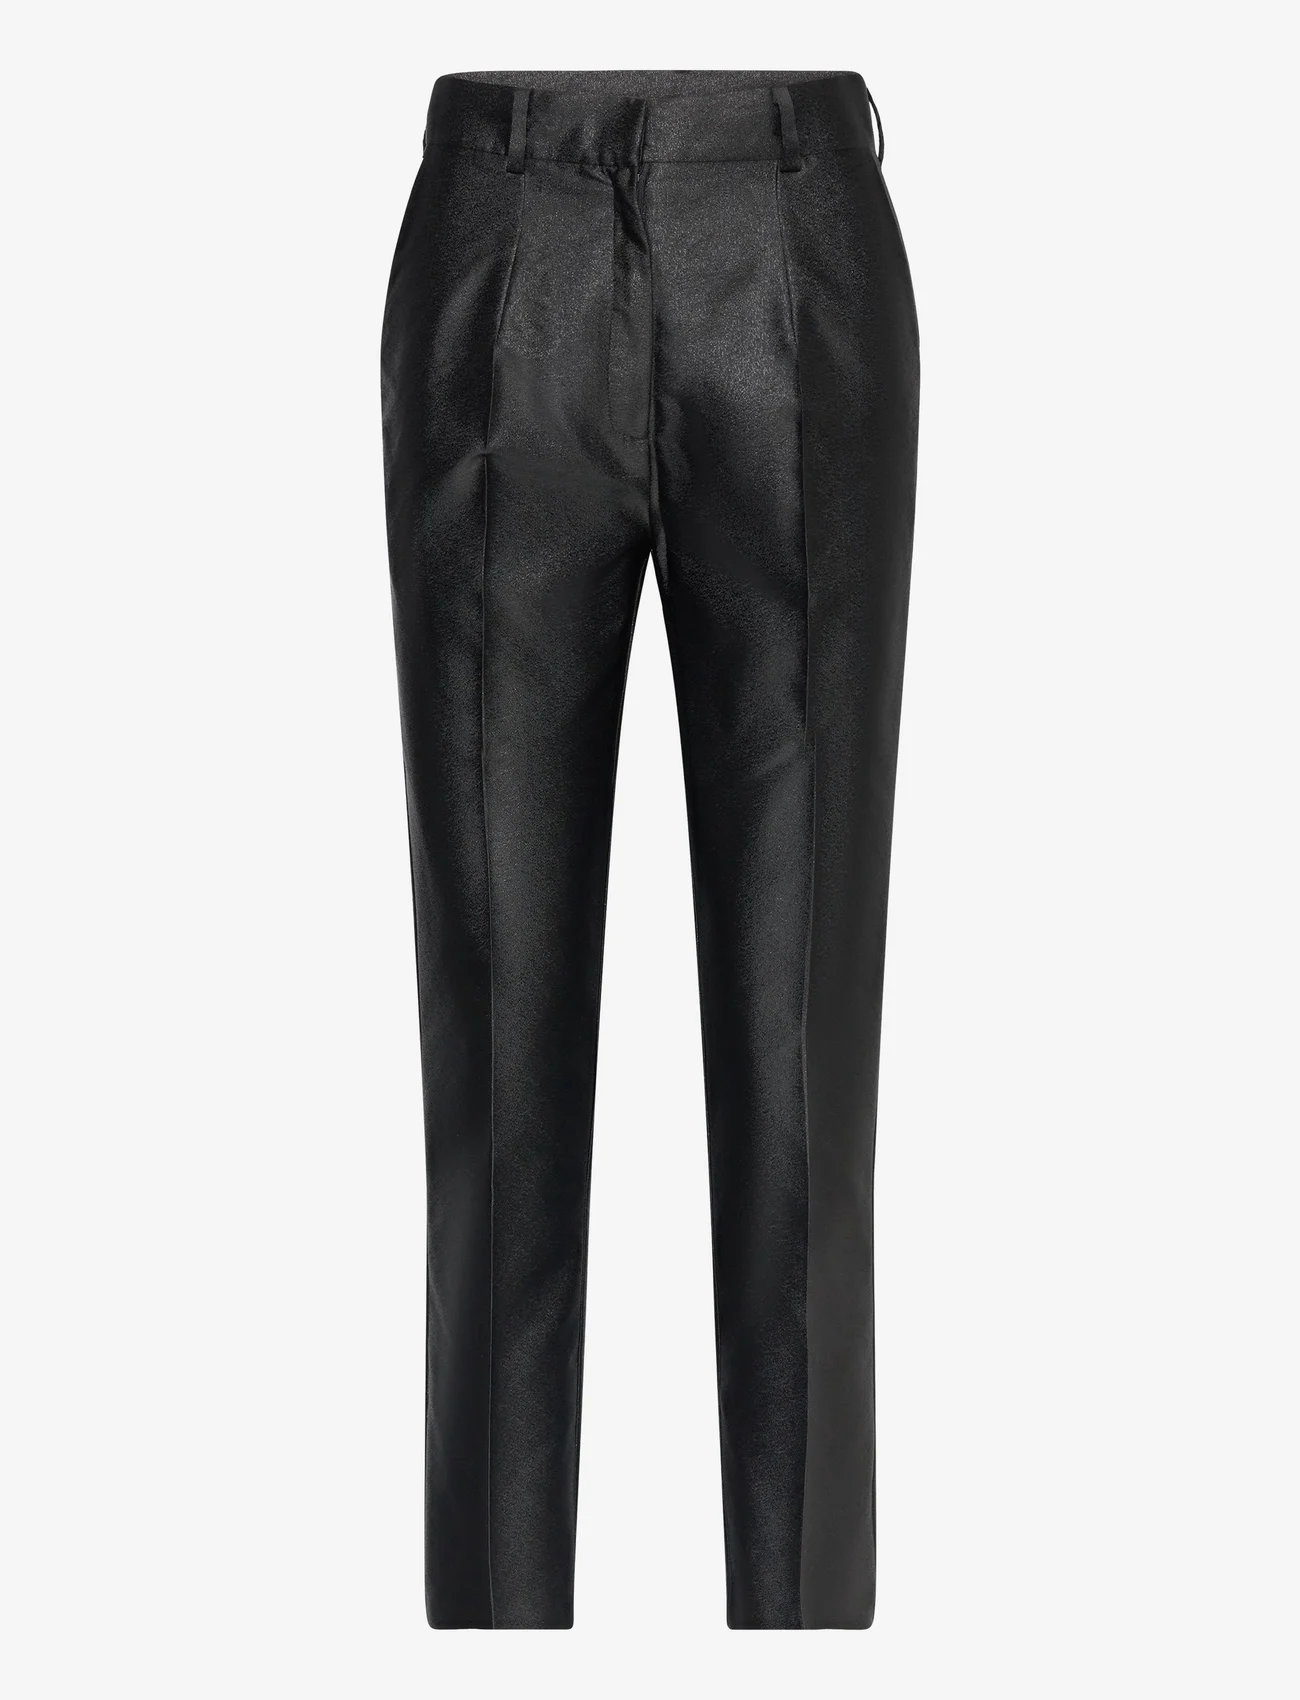 hálo - KAAMOS pants - tailored trousers - shimmering black - 0